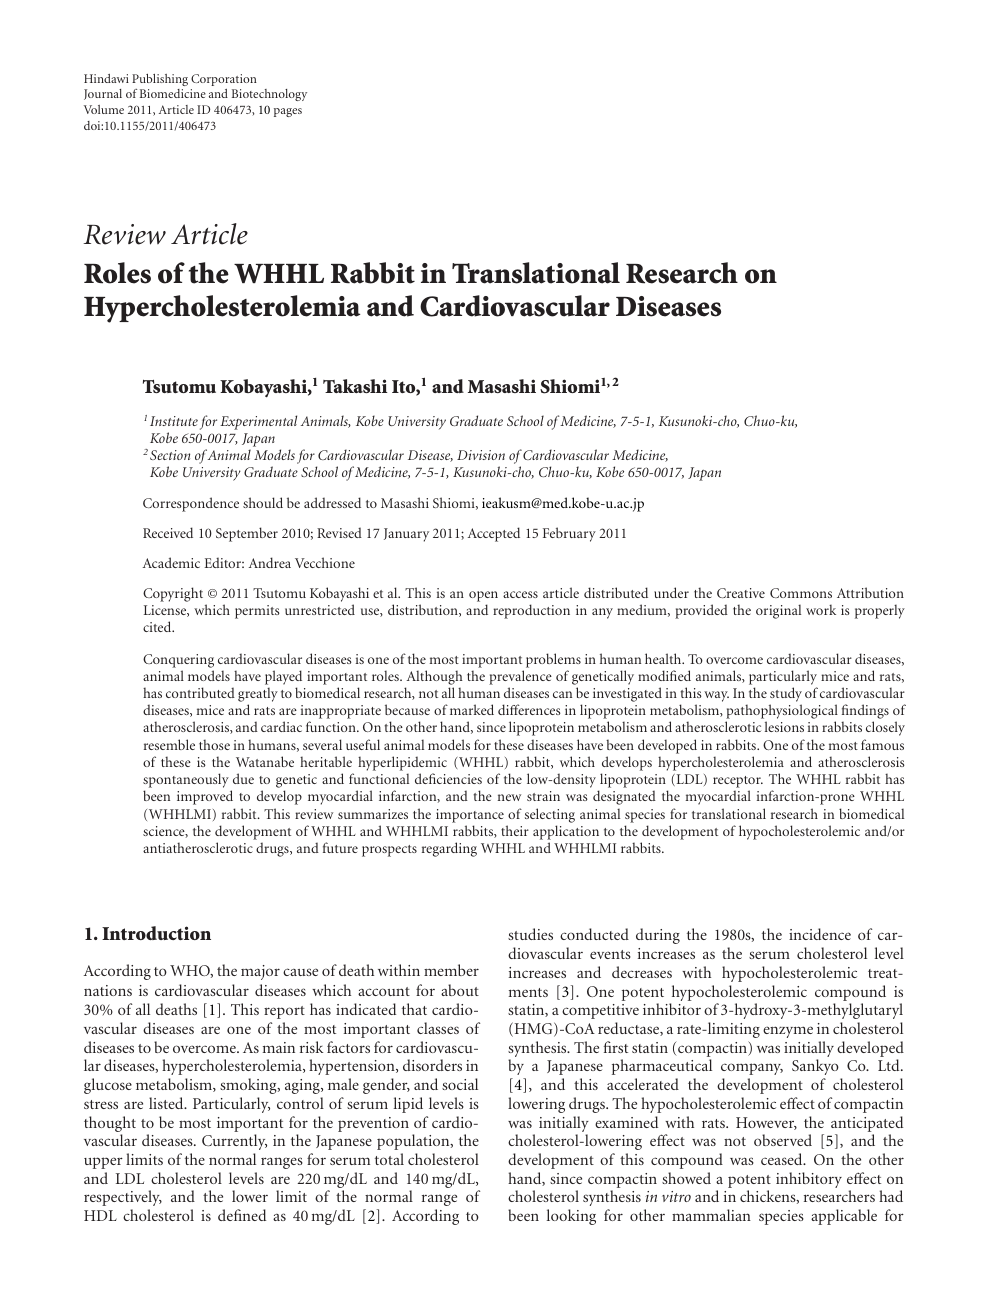 Roles of the WHHL Rabbit in Translational Research on Hypercholesterolemia  and Cardiovascular Diseases – topic of research paper in Basic medicine.  Download scholarly article PDF and read for free on CyberLeninka open